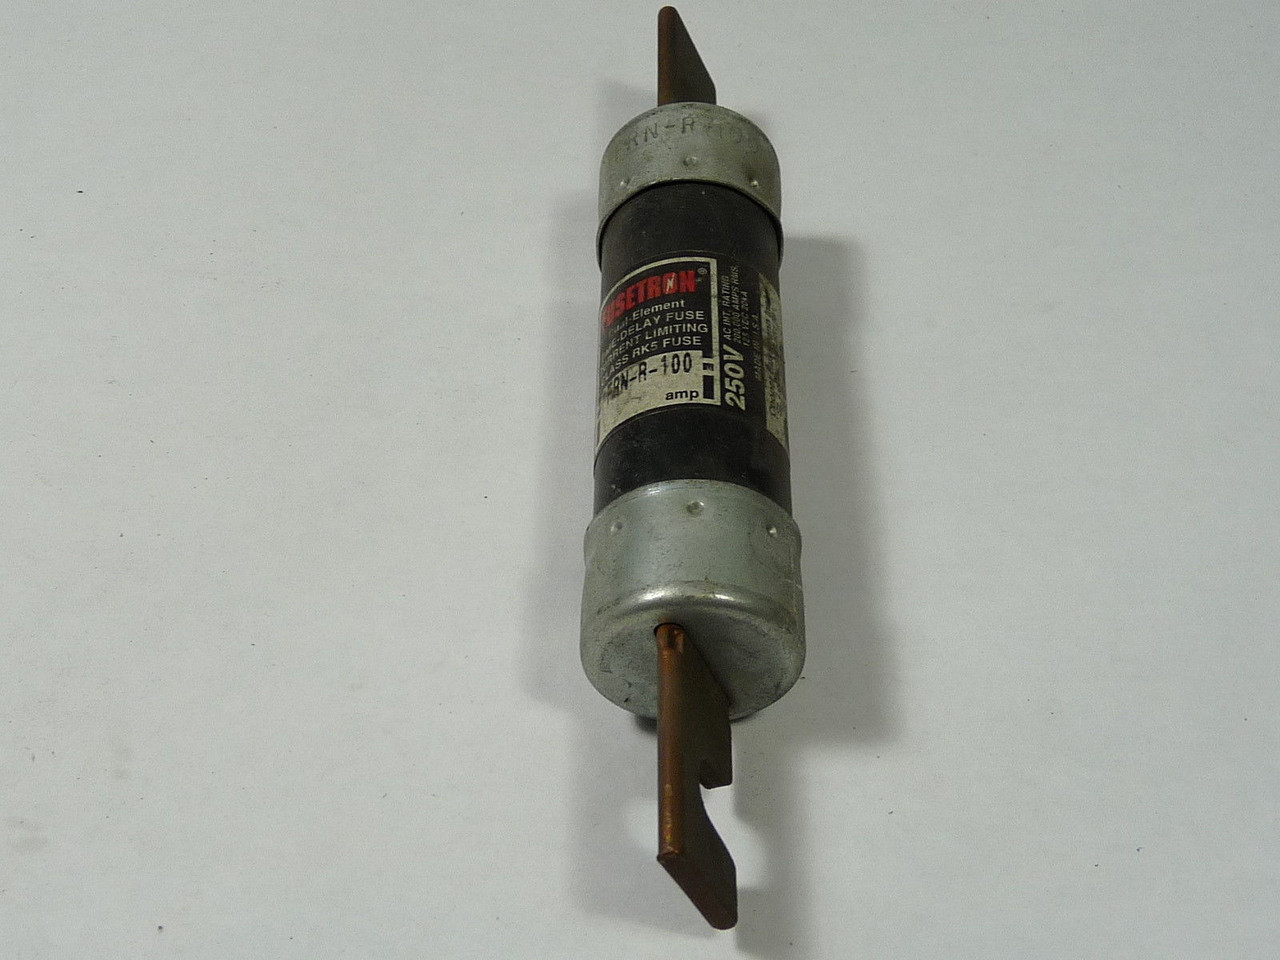 Fusetron FRN-R-100 Time Delay Fuse 100A 250V USED